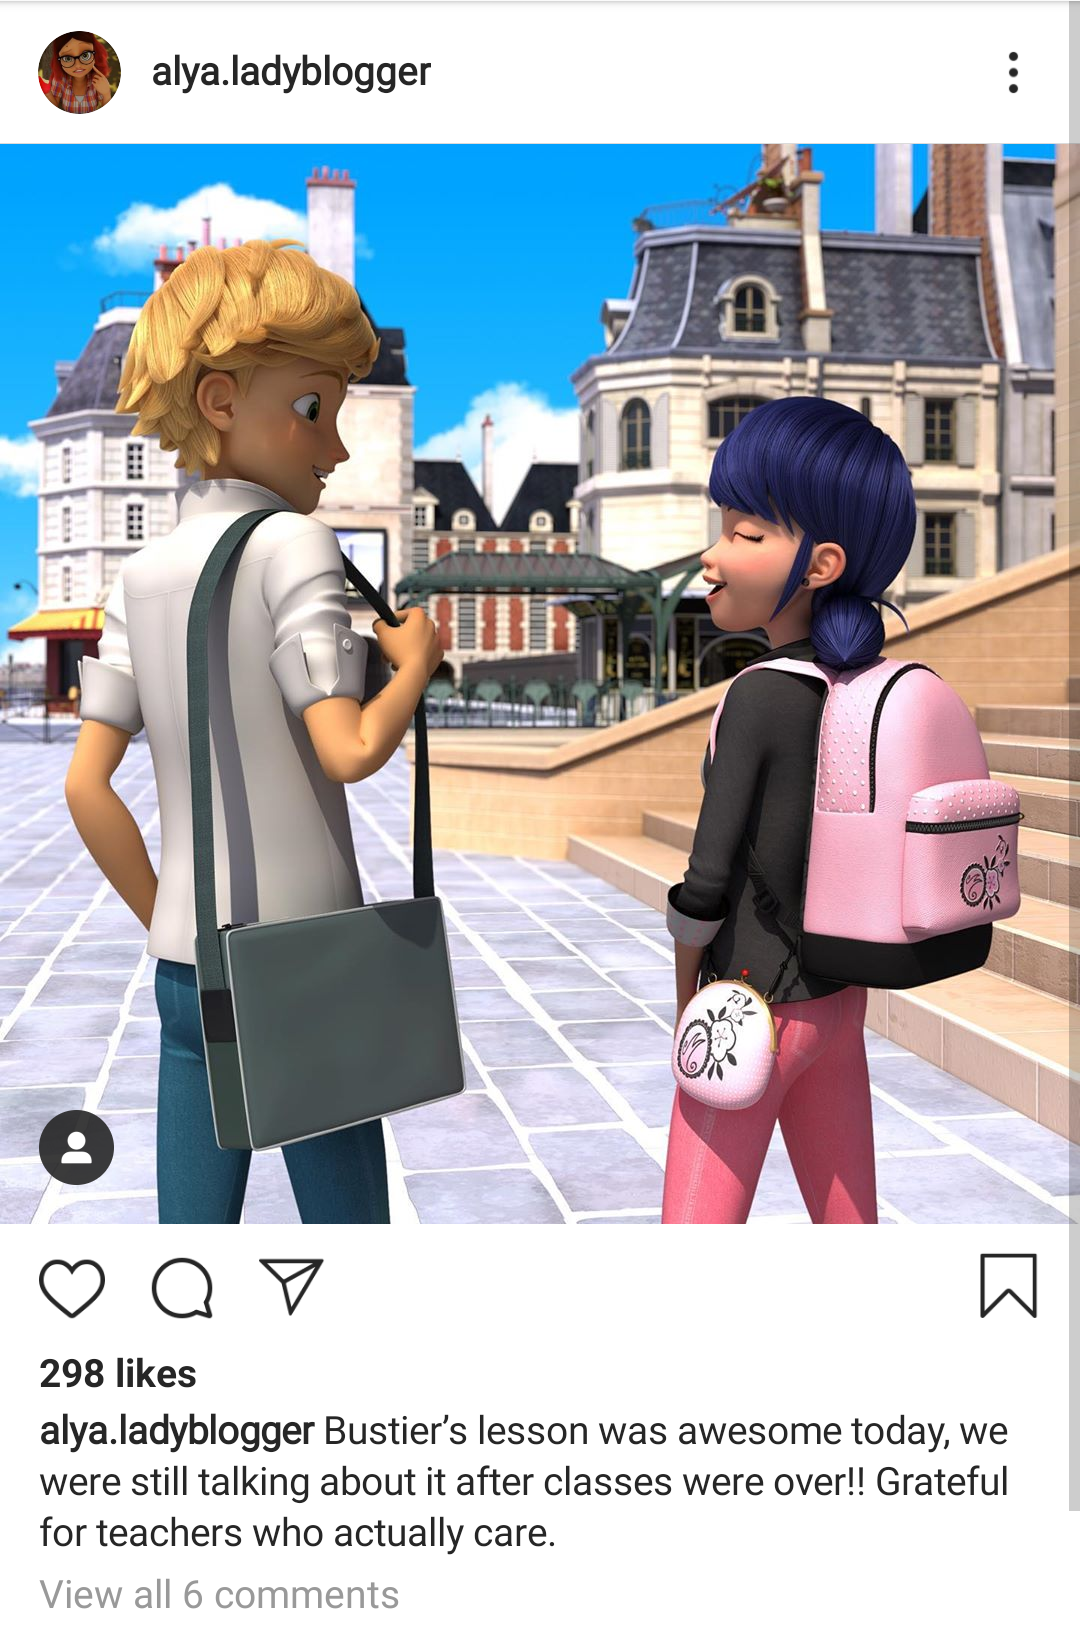 Adrien And Marinette In Alyas New Instagram Post Miraculousladybug